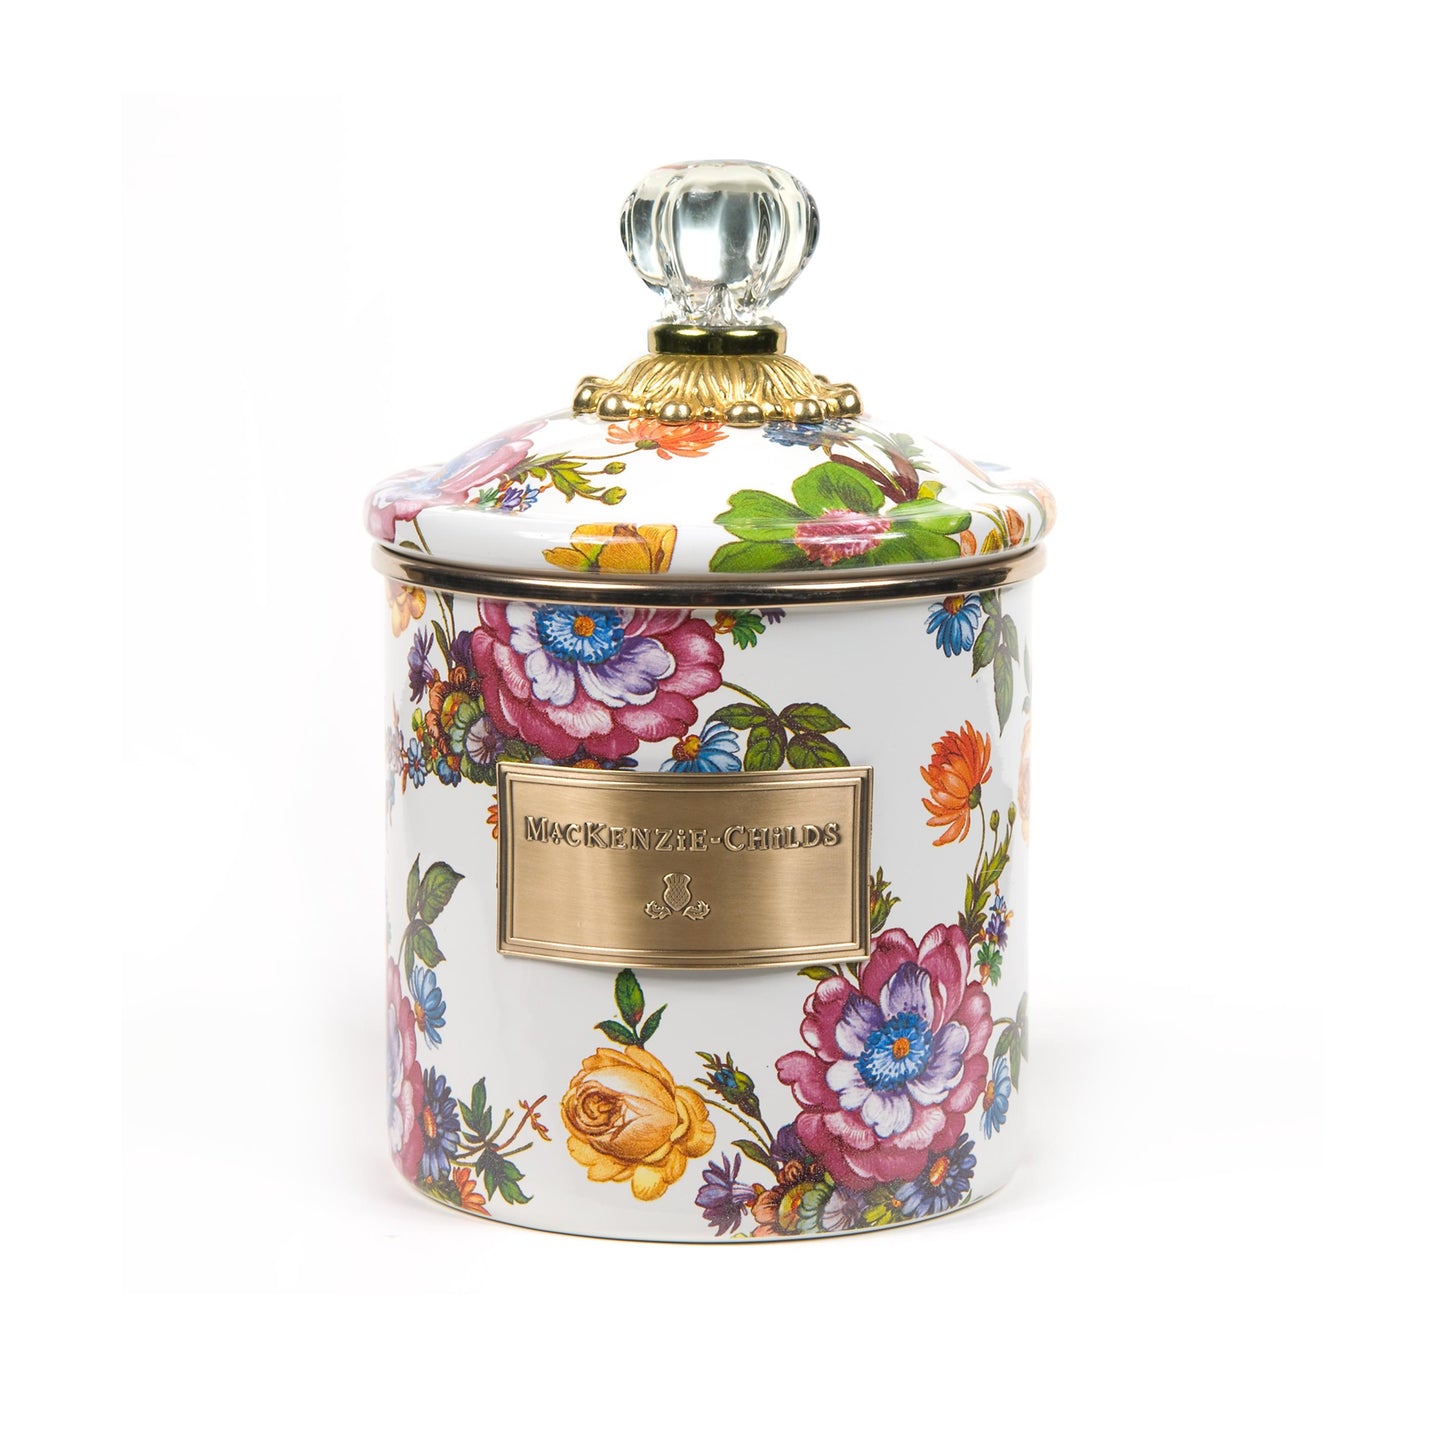 Flower Market Small Canister - White (Mackenzie Childs) - Gallery Gifts Online 